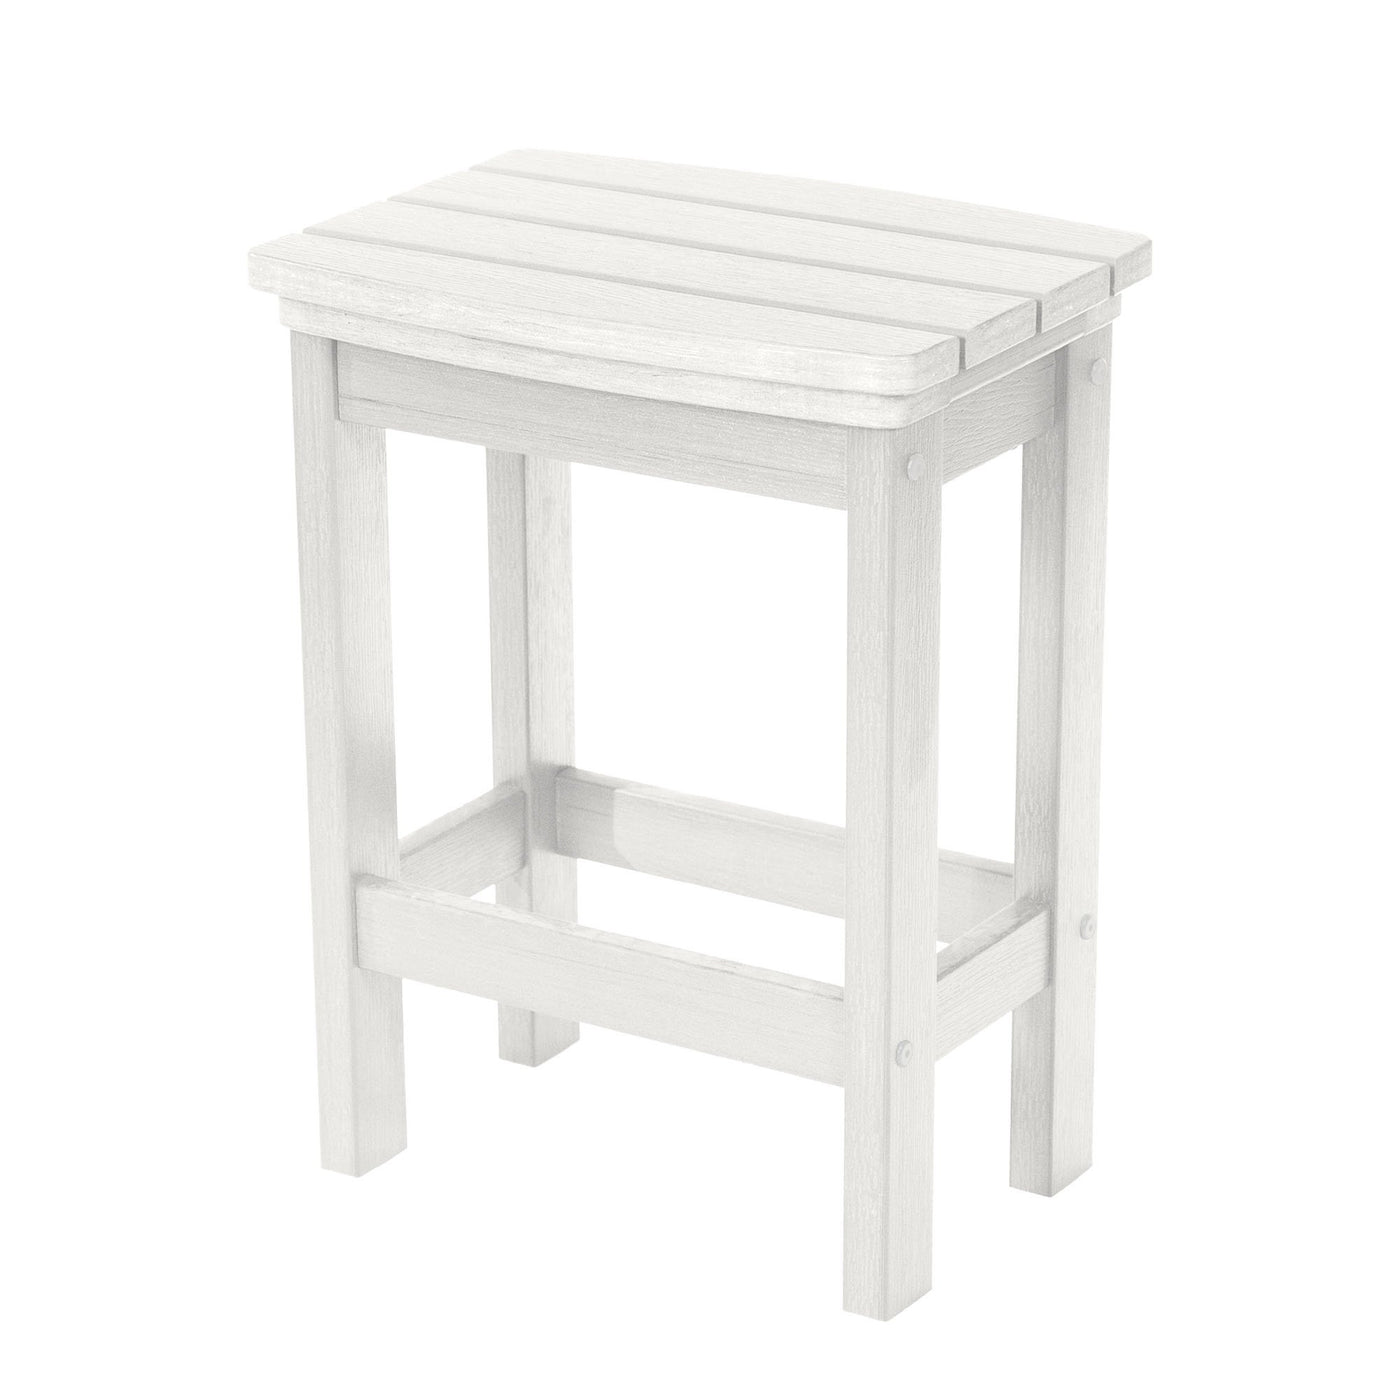 Back view of Lehigh counter height stool in White